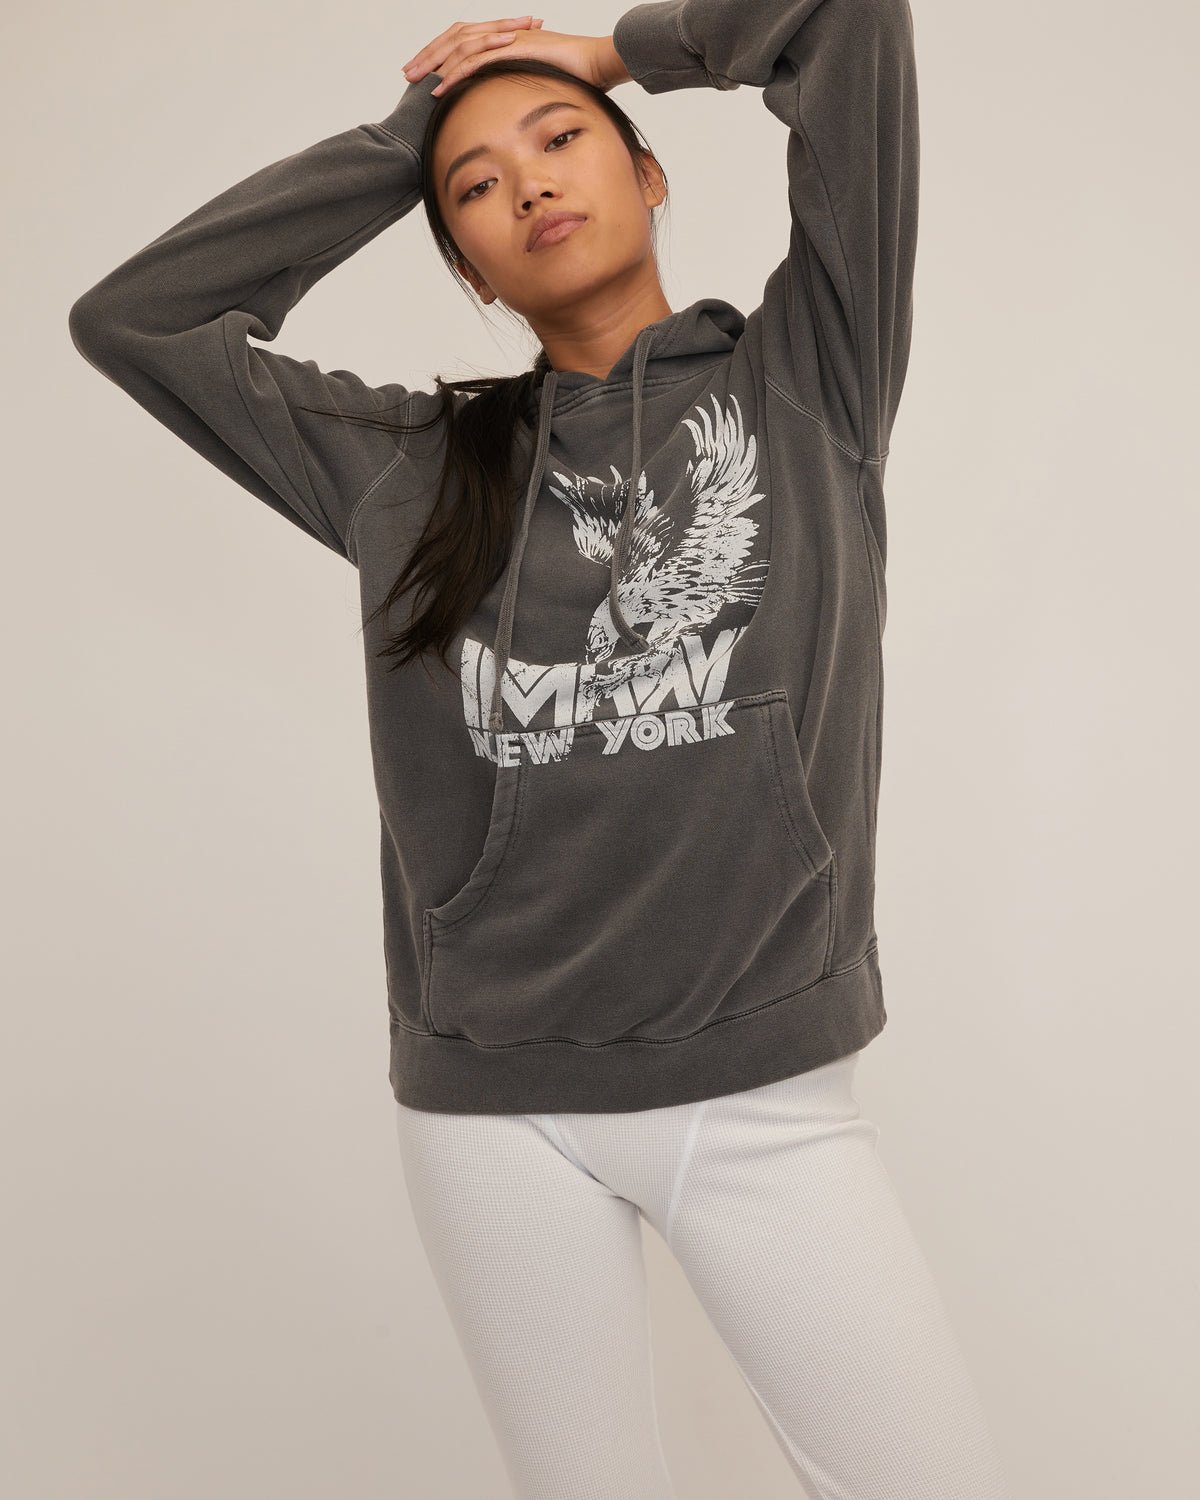 Eagle Graphic French Terry Hoodie | MARISSA WEBB